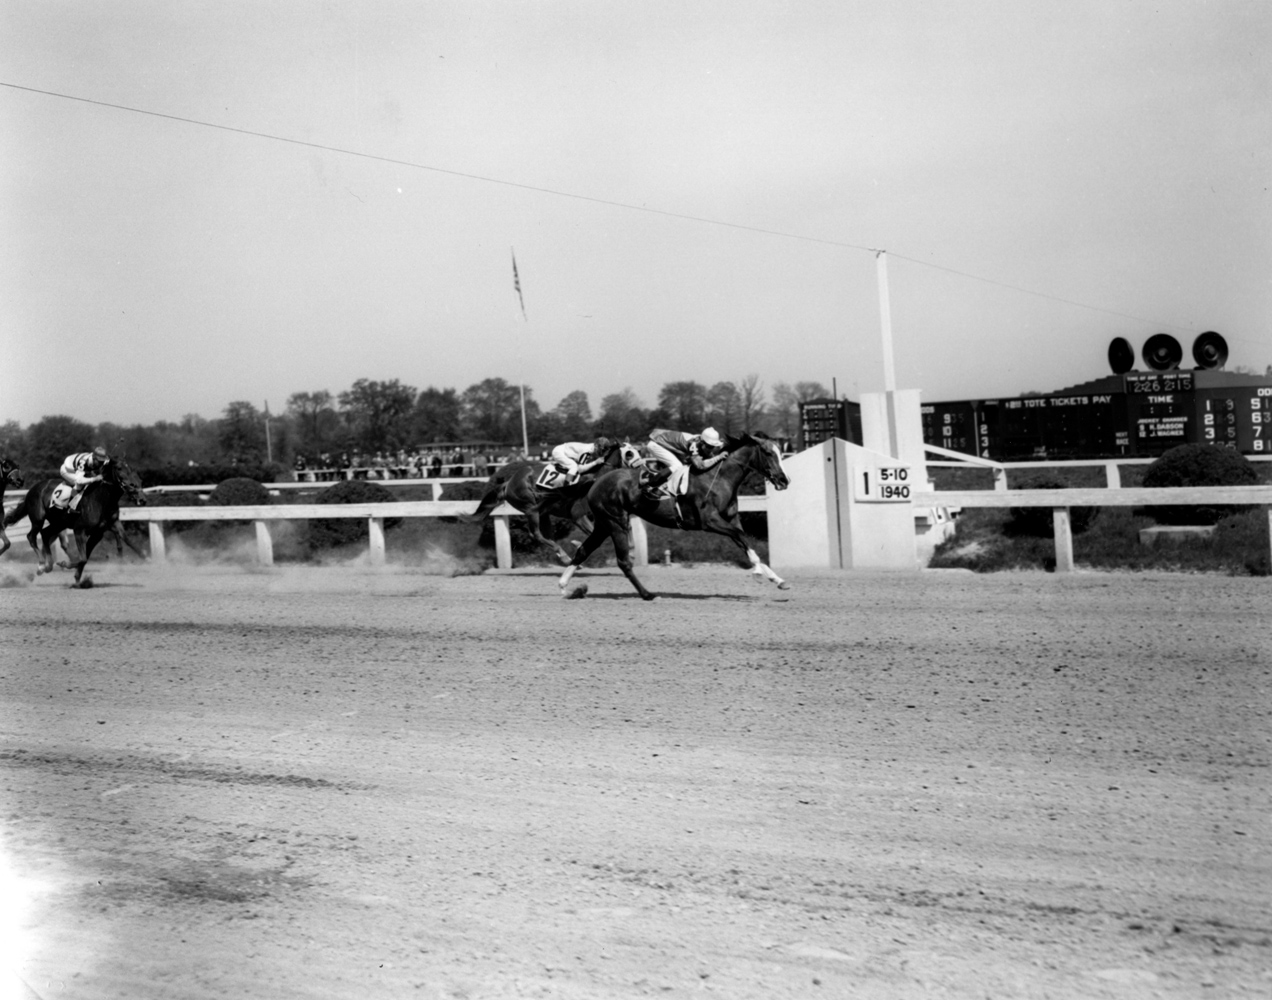 Ralph Neves and Sun Ginger winning a race at Pimlico, May 1940 (Keeneland Library Morgan Collection/Museum Collection)